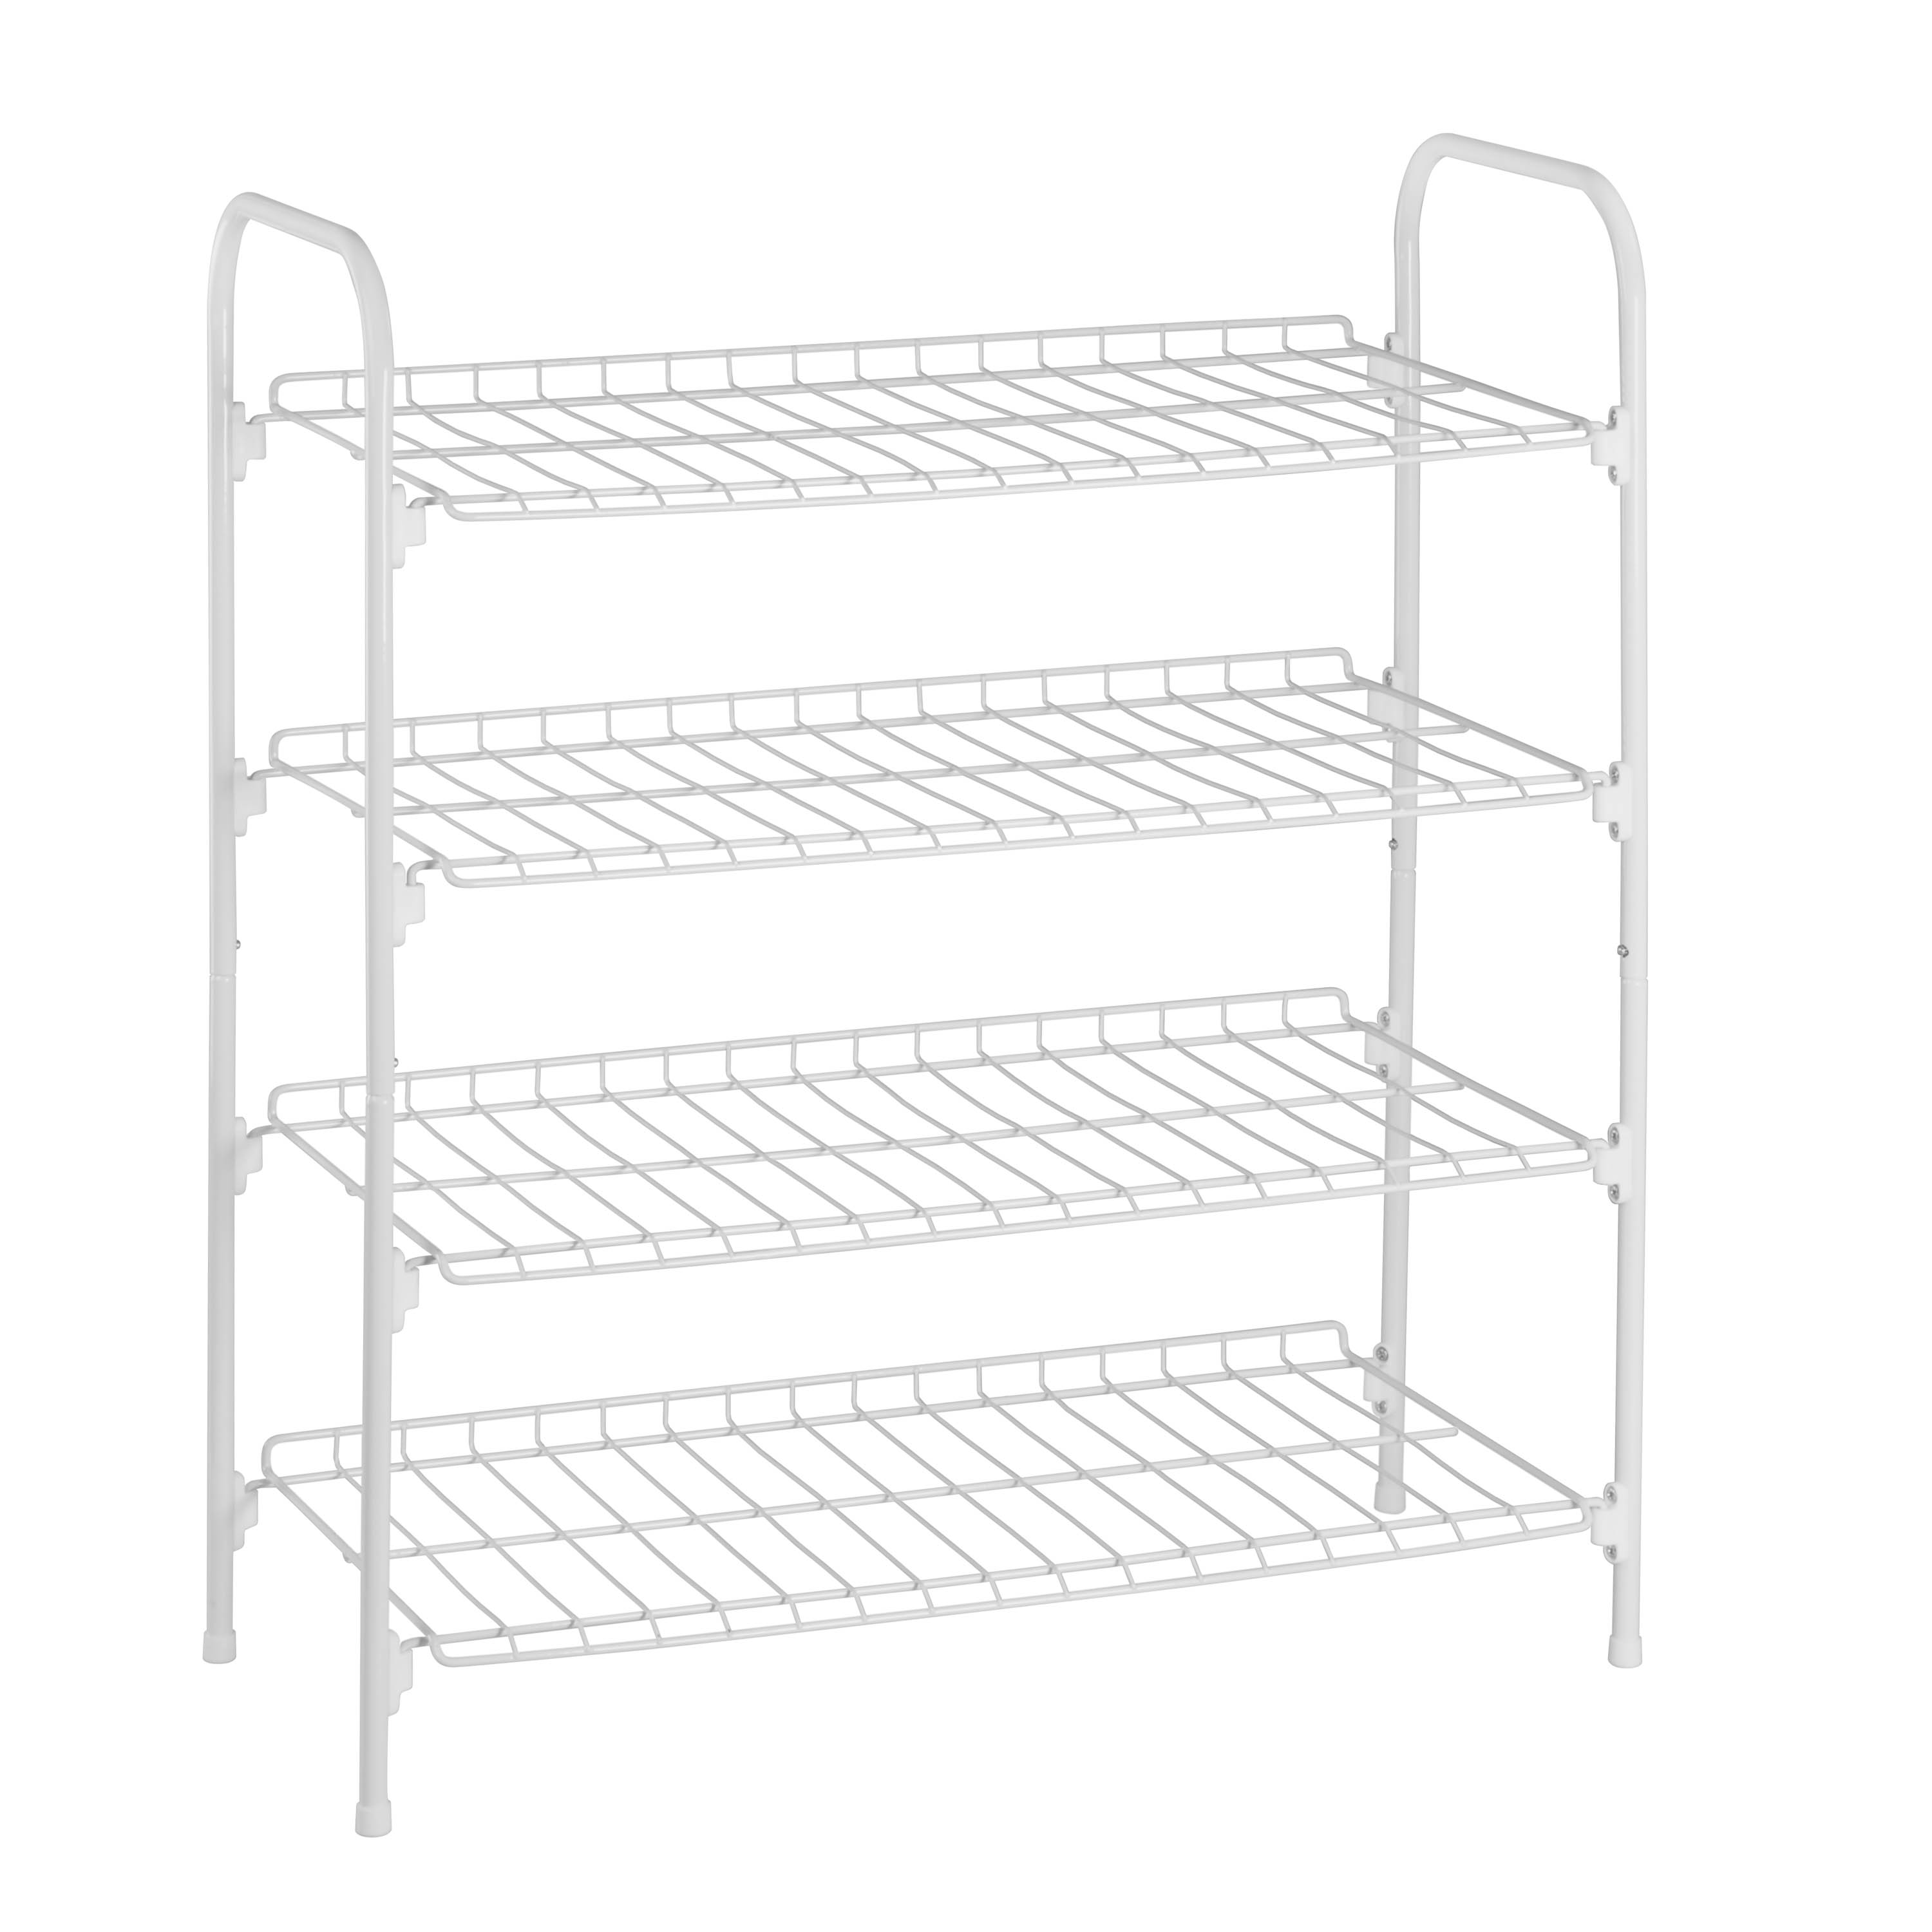 Honey Can Do 4-Tier White Metal Shoe Rack And Accessories Storage, White, Basement/Garage - image 1 of 8